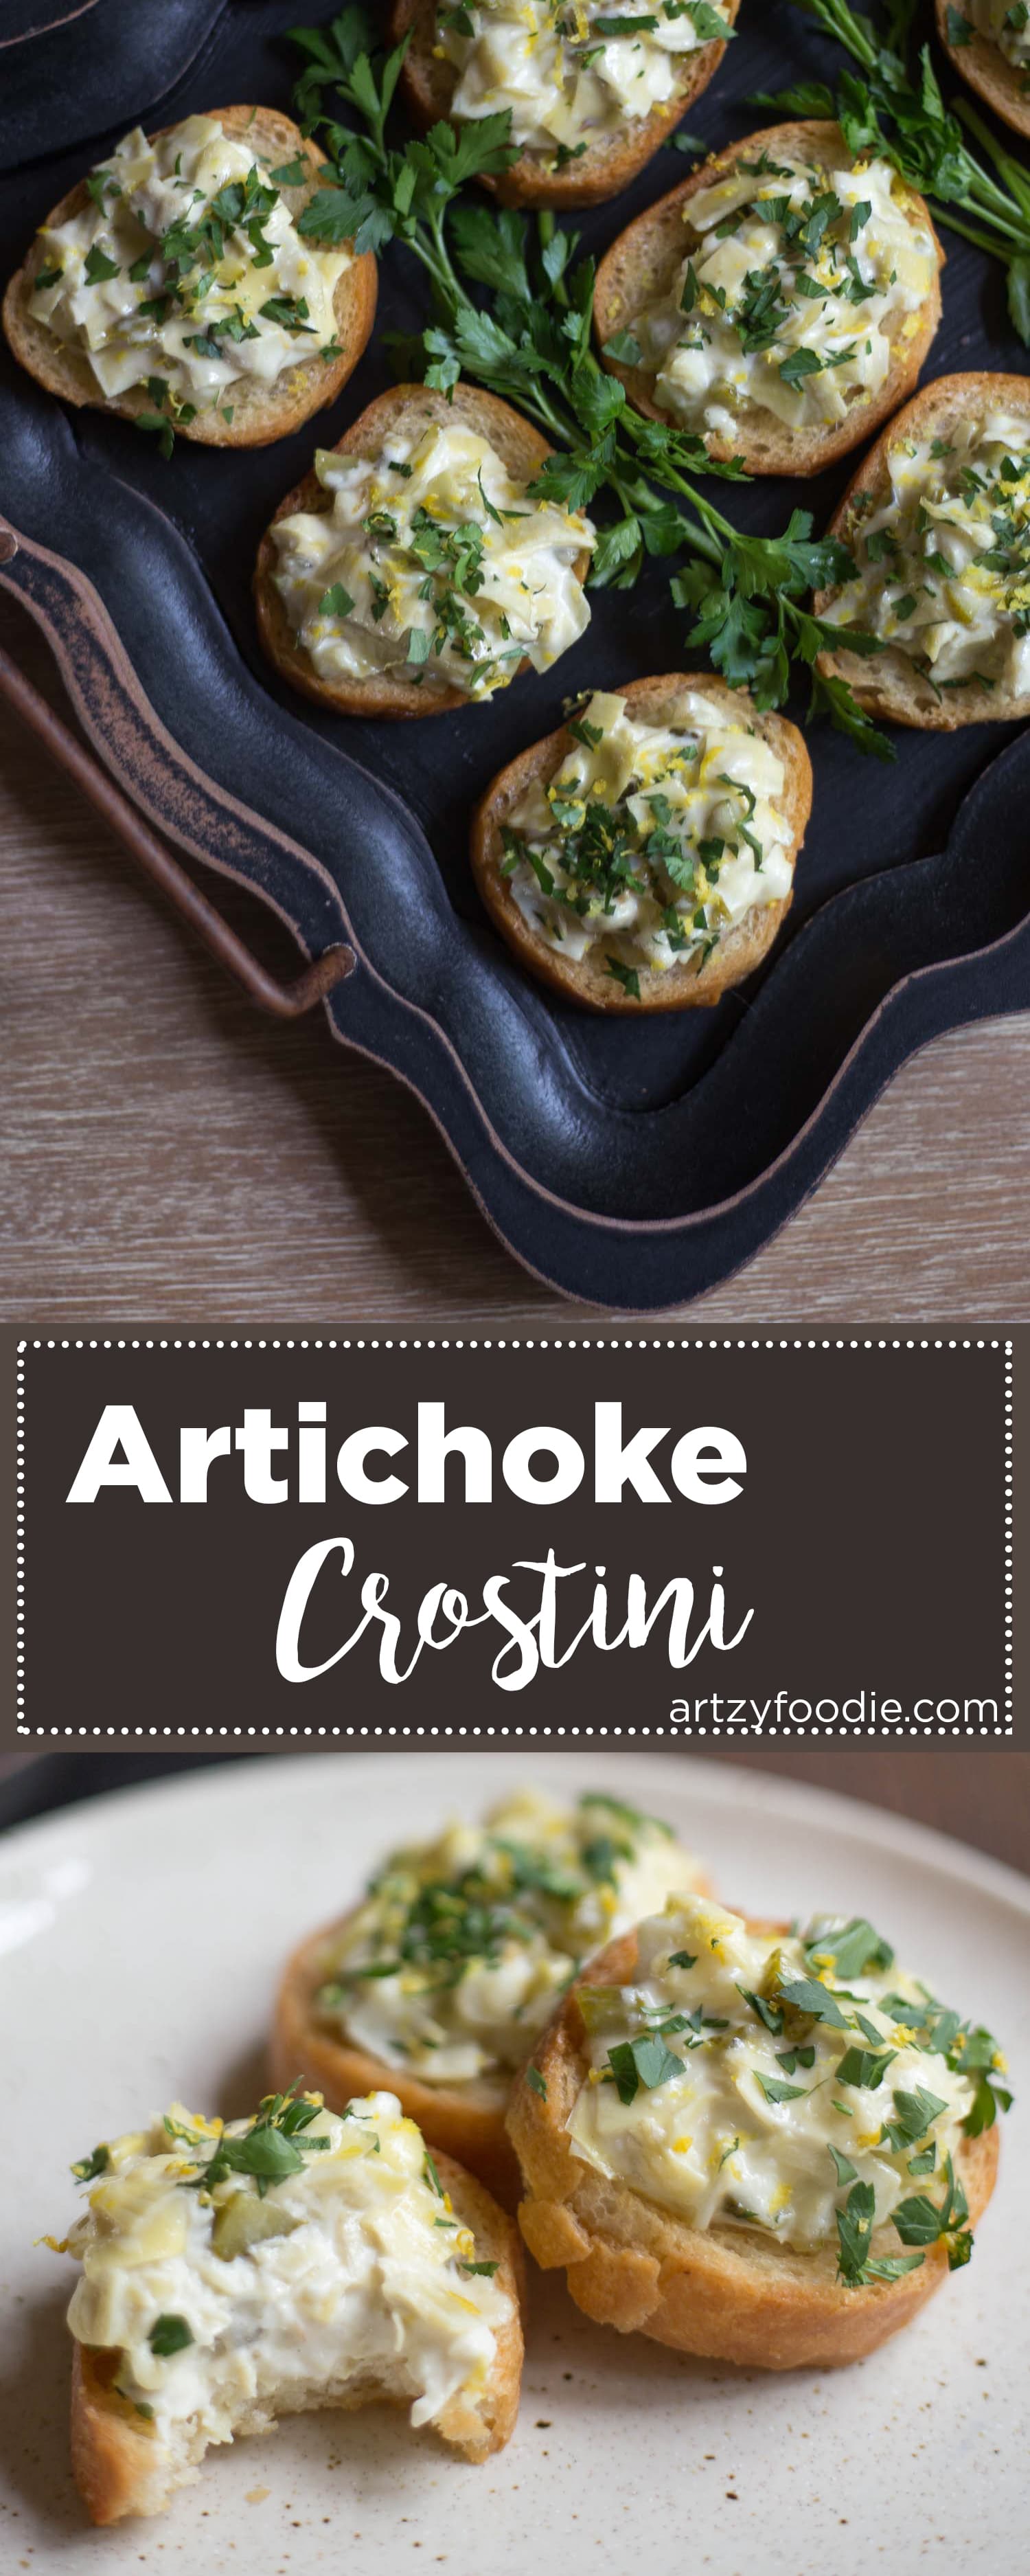 Artichoke crostini are a tasty finger food that works great for holiday parties! |artzyfoodie.com|